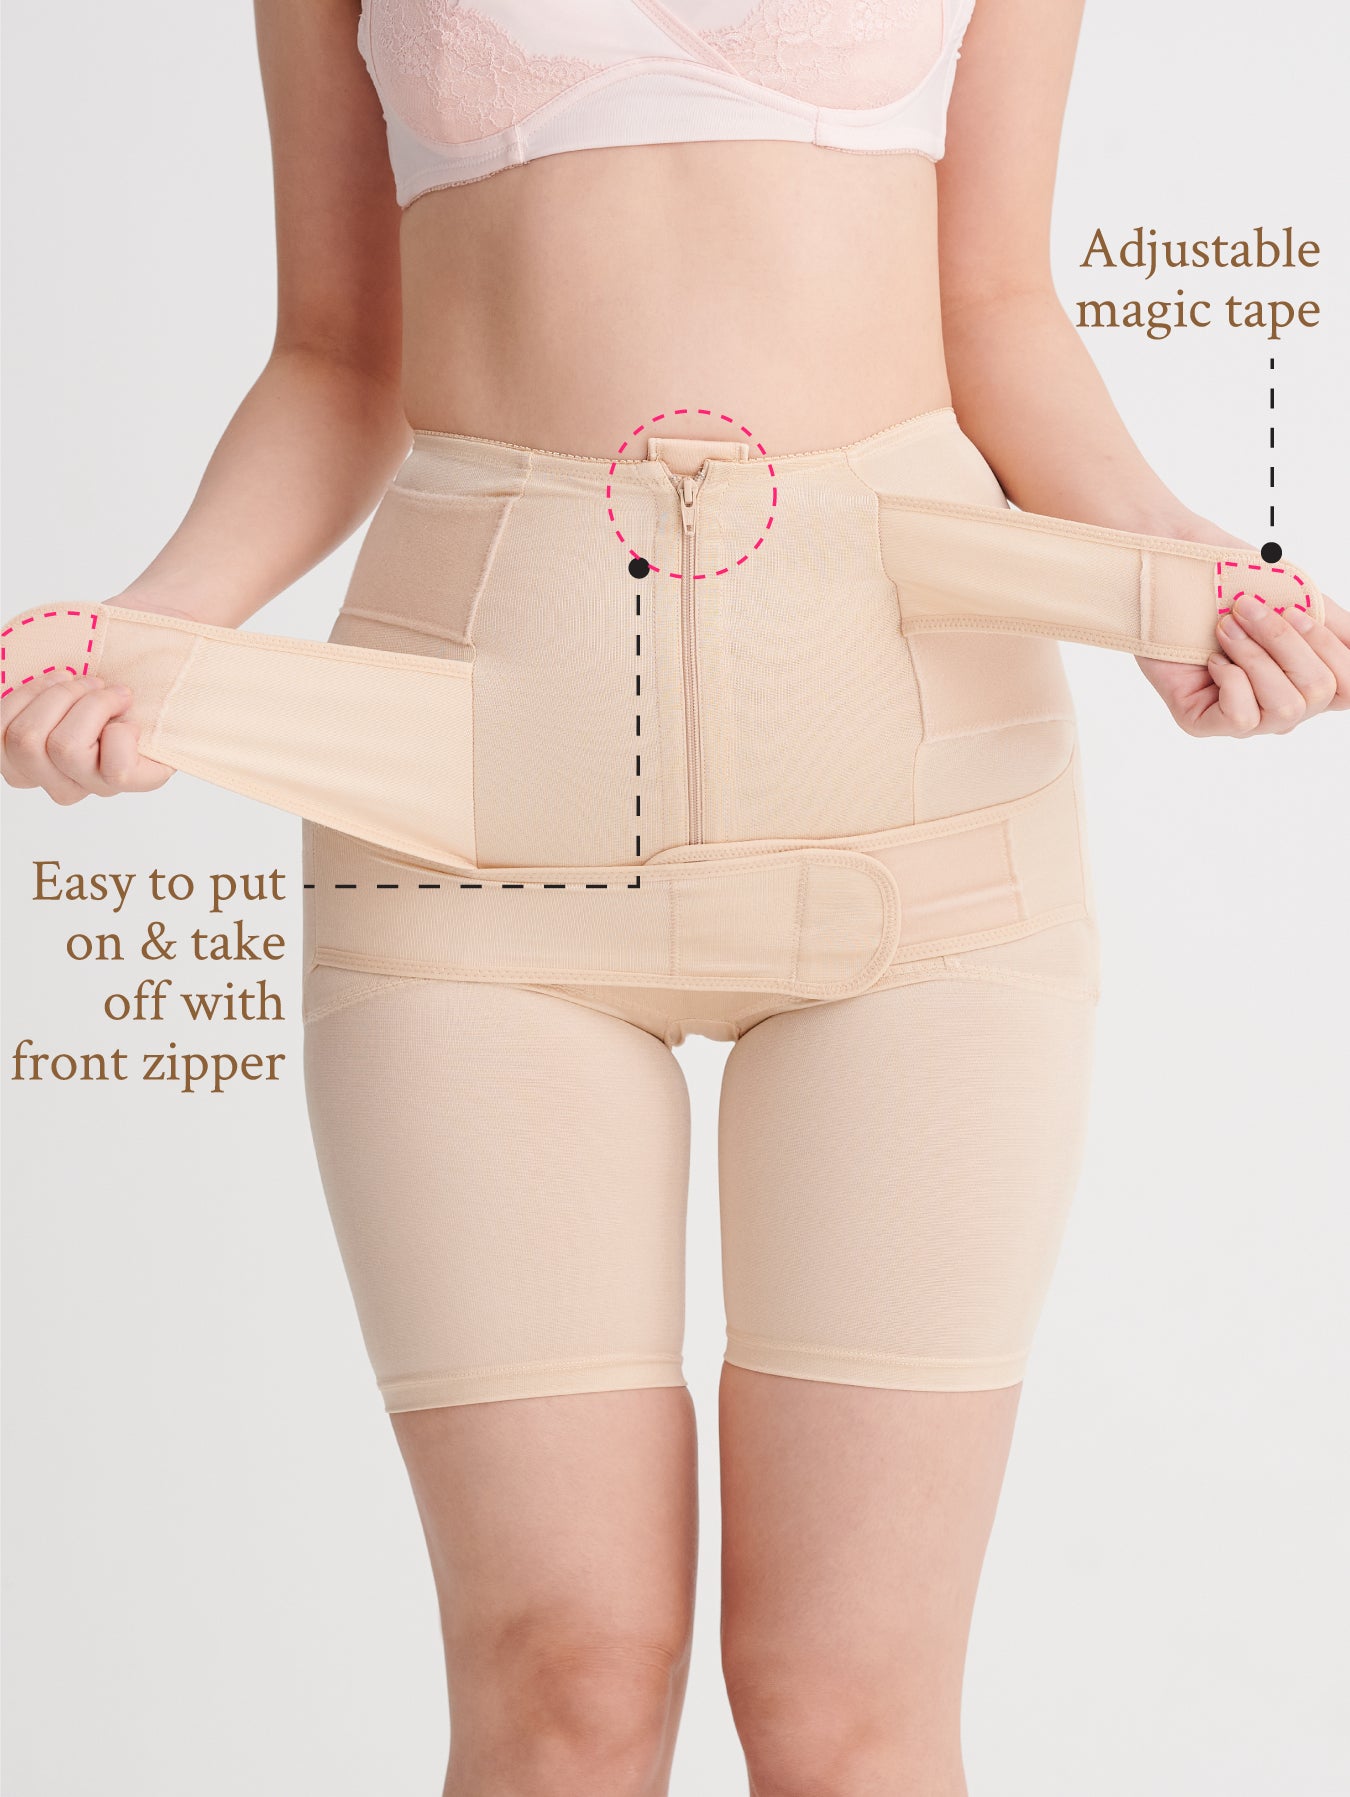 Postpartum Body Shaping Support Pants Step 3